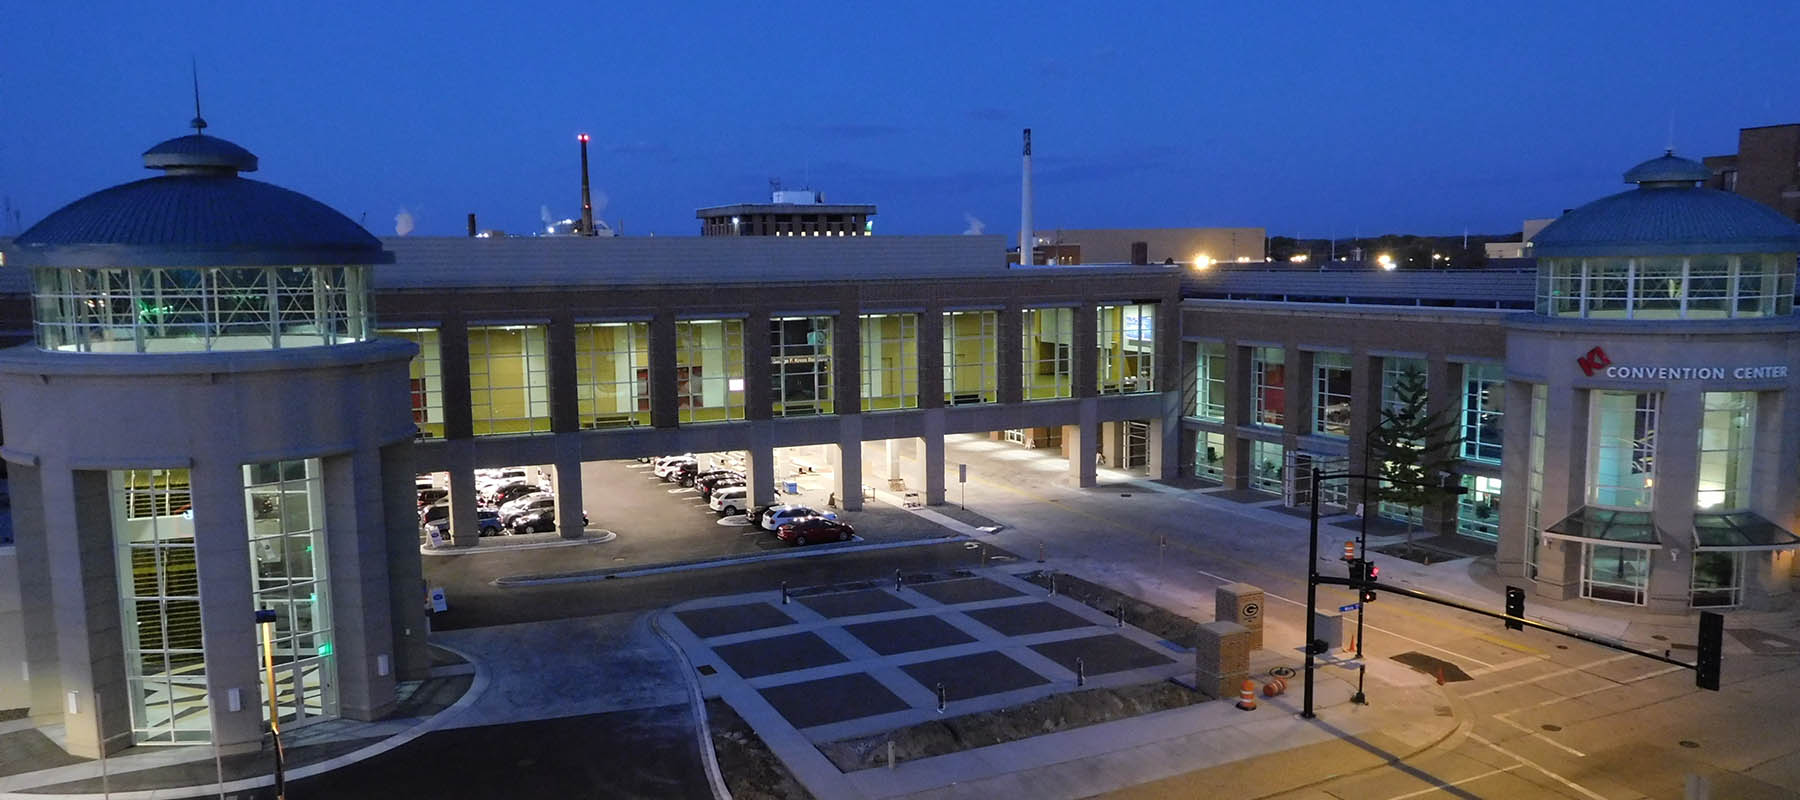 Aerial view of the exterior of the KI Convention Center in downtown Green Bay, WI